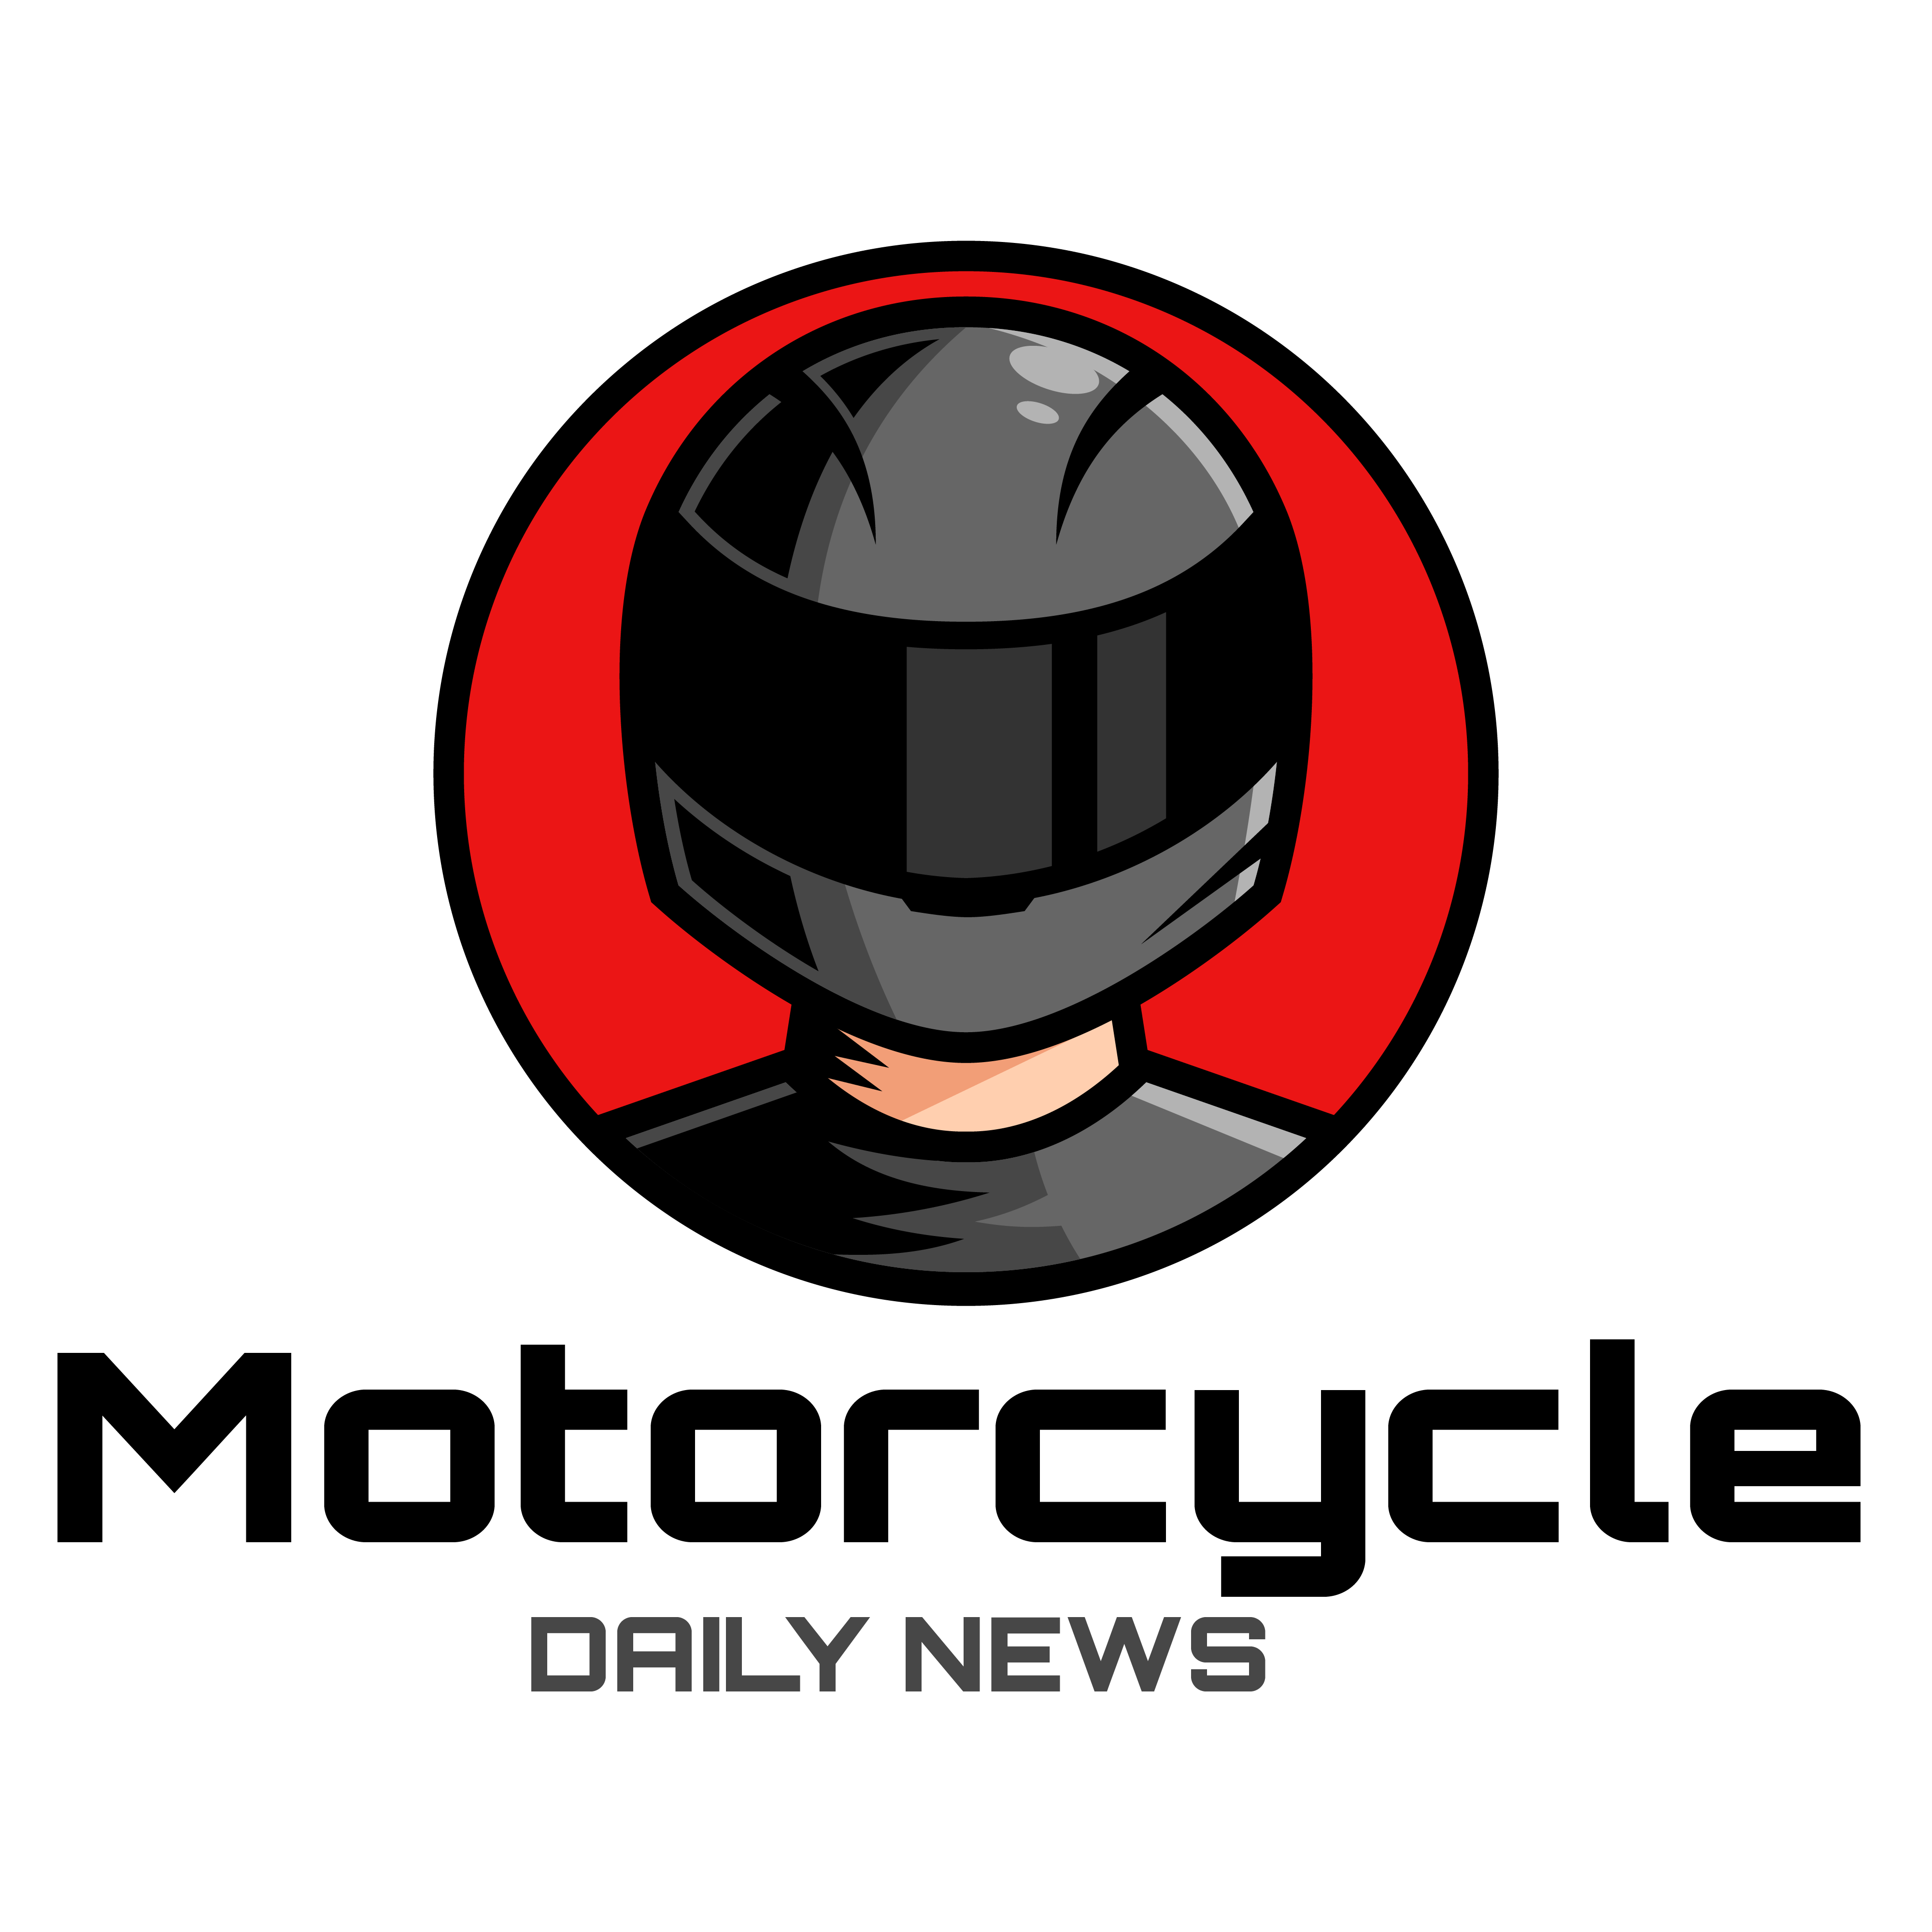 motorcycle daily news